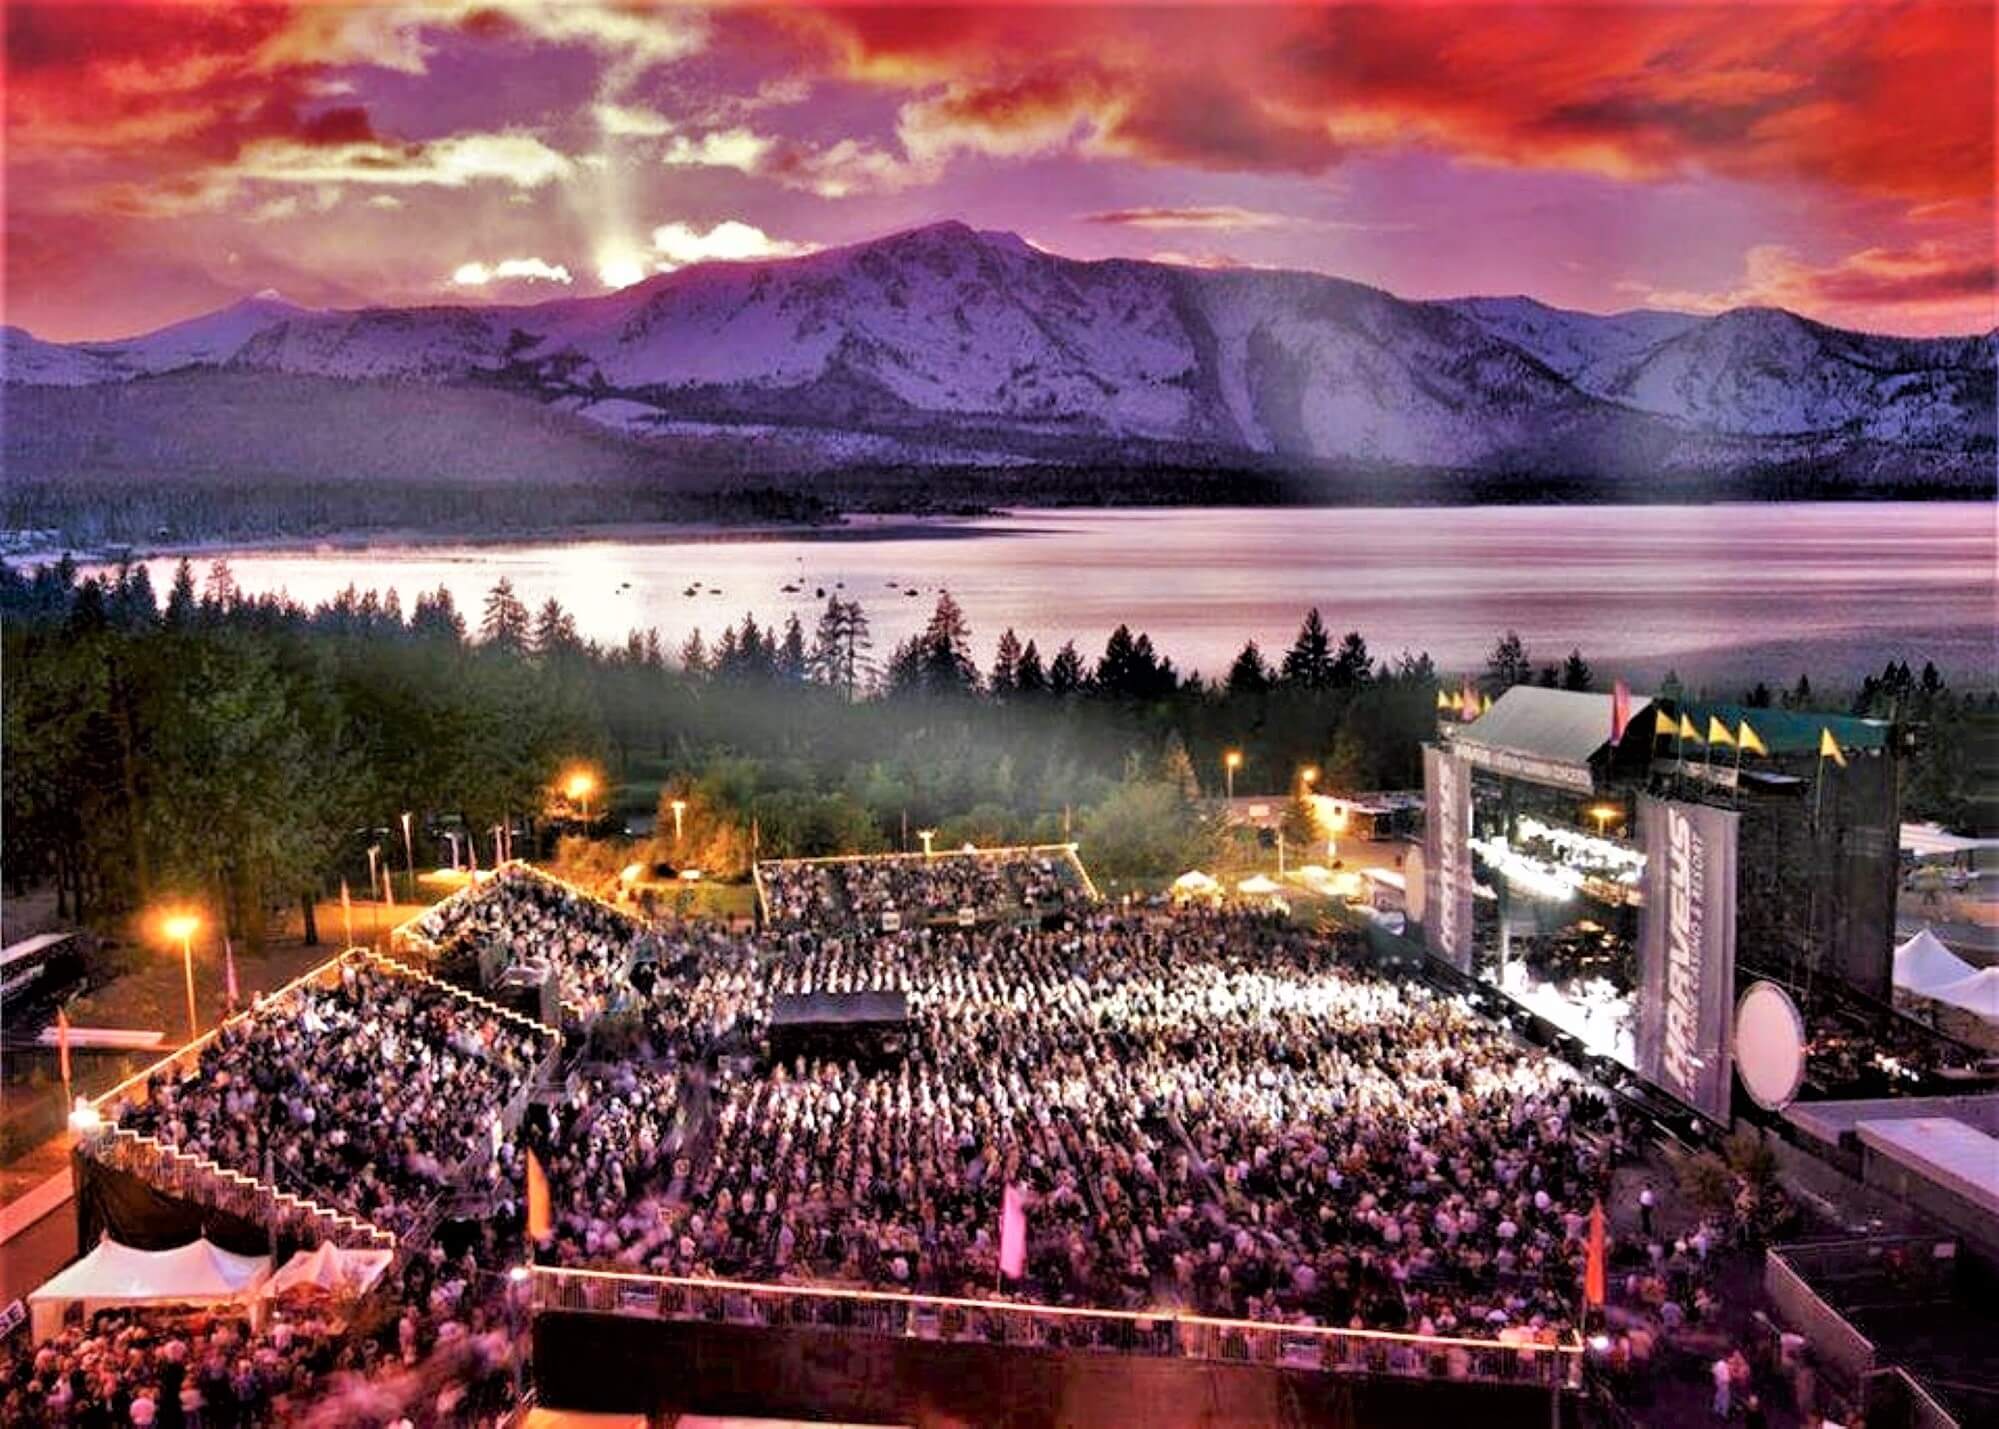 Lake tahoe casino shows and entertainment